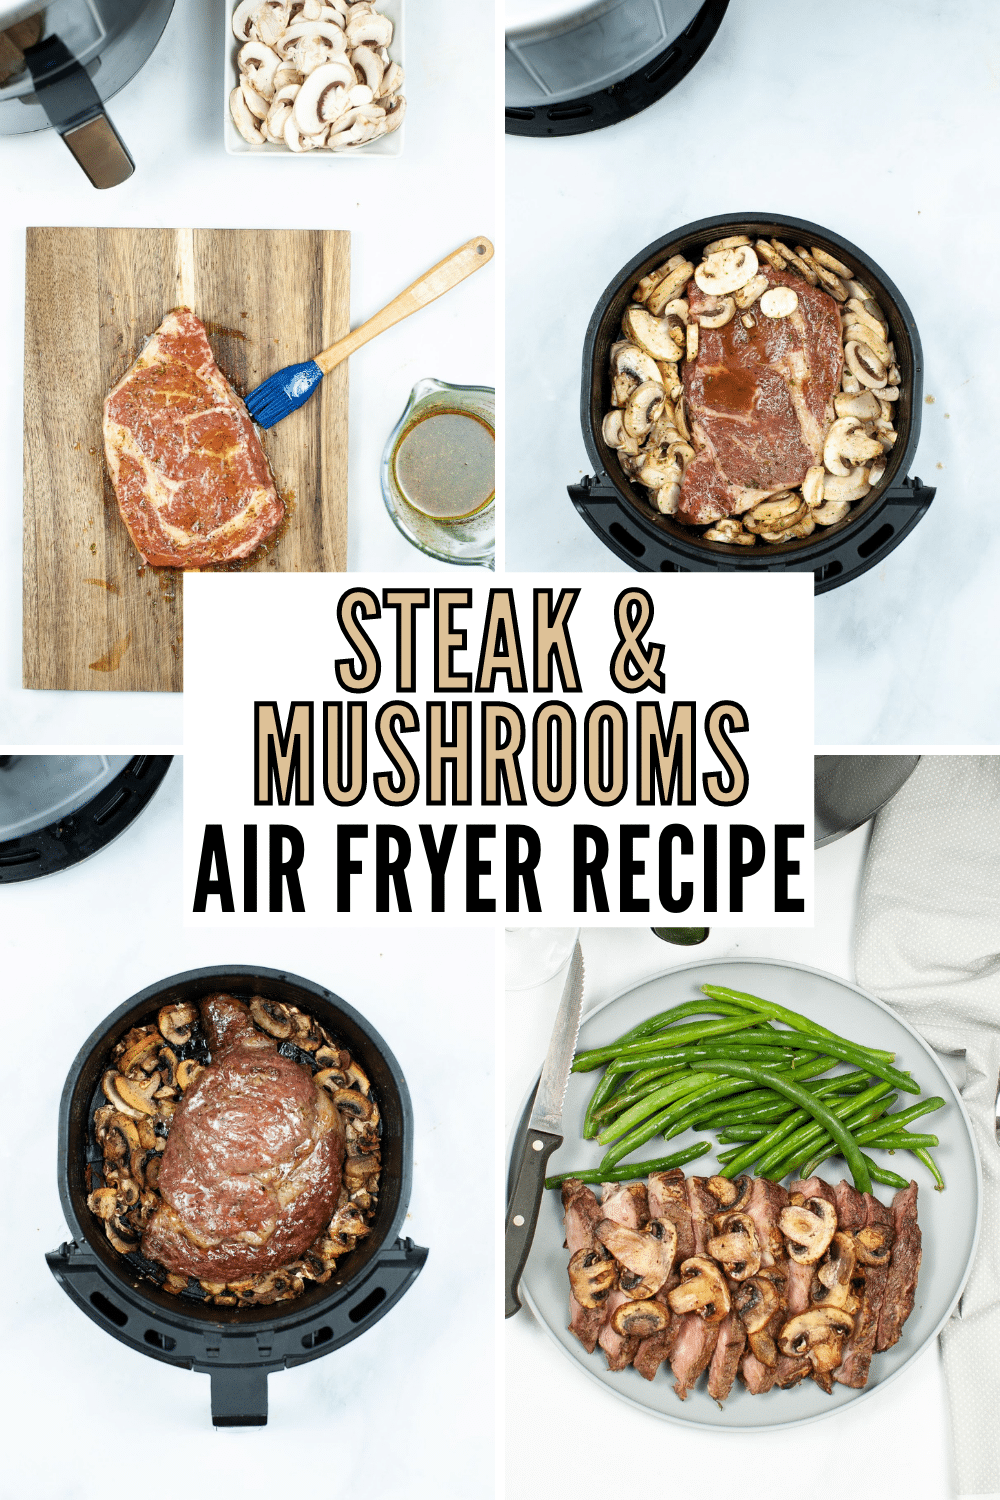 Air Fryer Steak and Mushrooms are tender and flavorful but also easy to make. It's a great weeknight dinner and is ready in under 30 minutes. #airfryer #steakandmushrooms #steak #mushrooms #recipe via @wondermomwannab